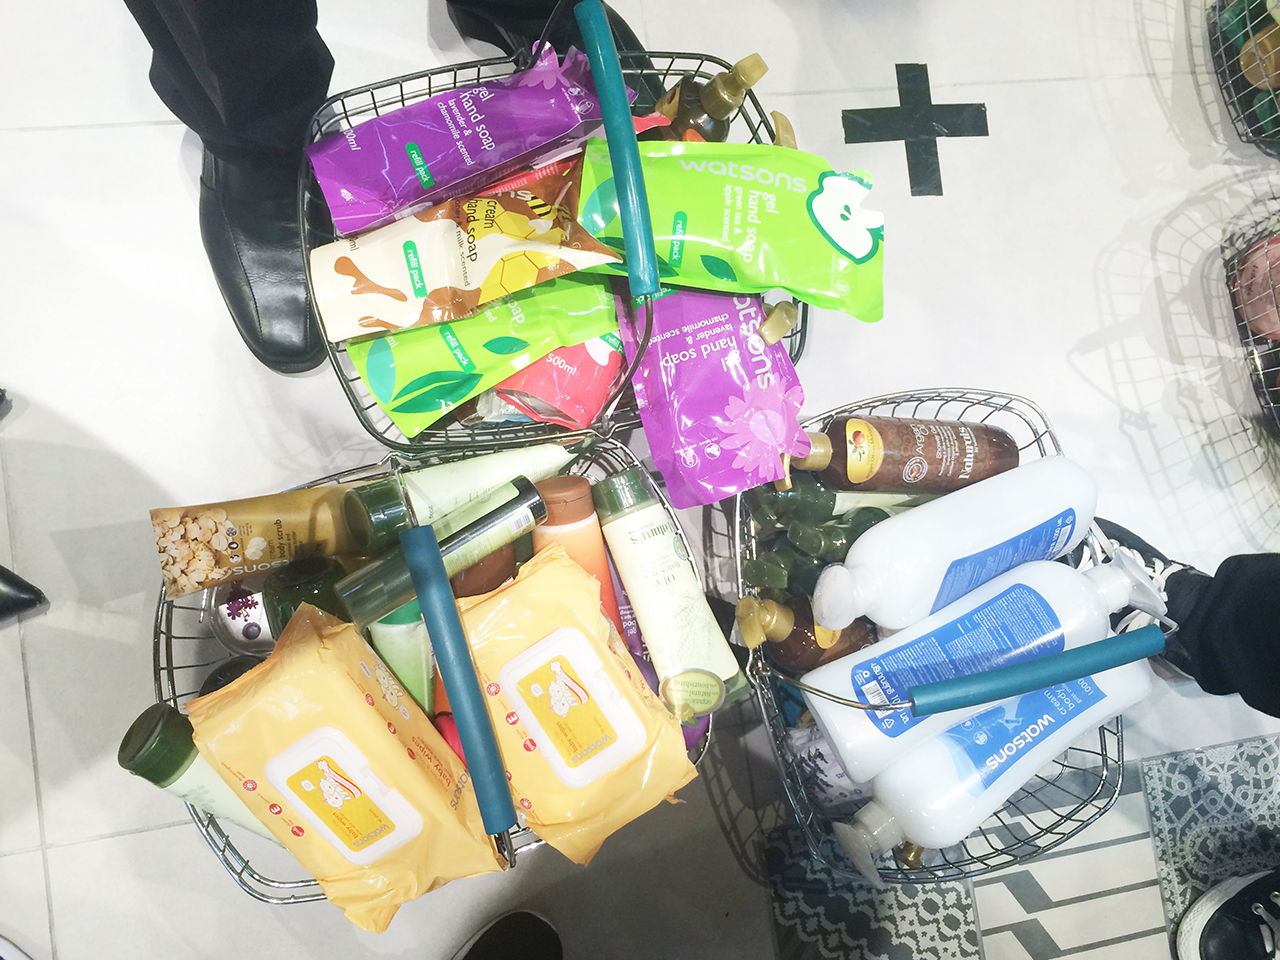 3 baskets full of the Watsons brand products that were grabbed by the winning team